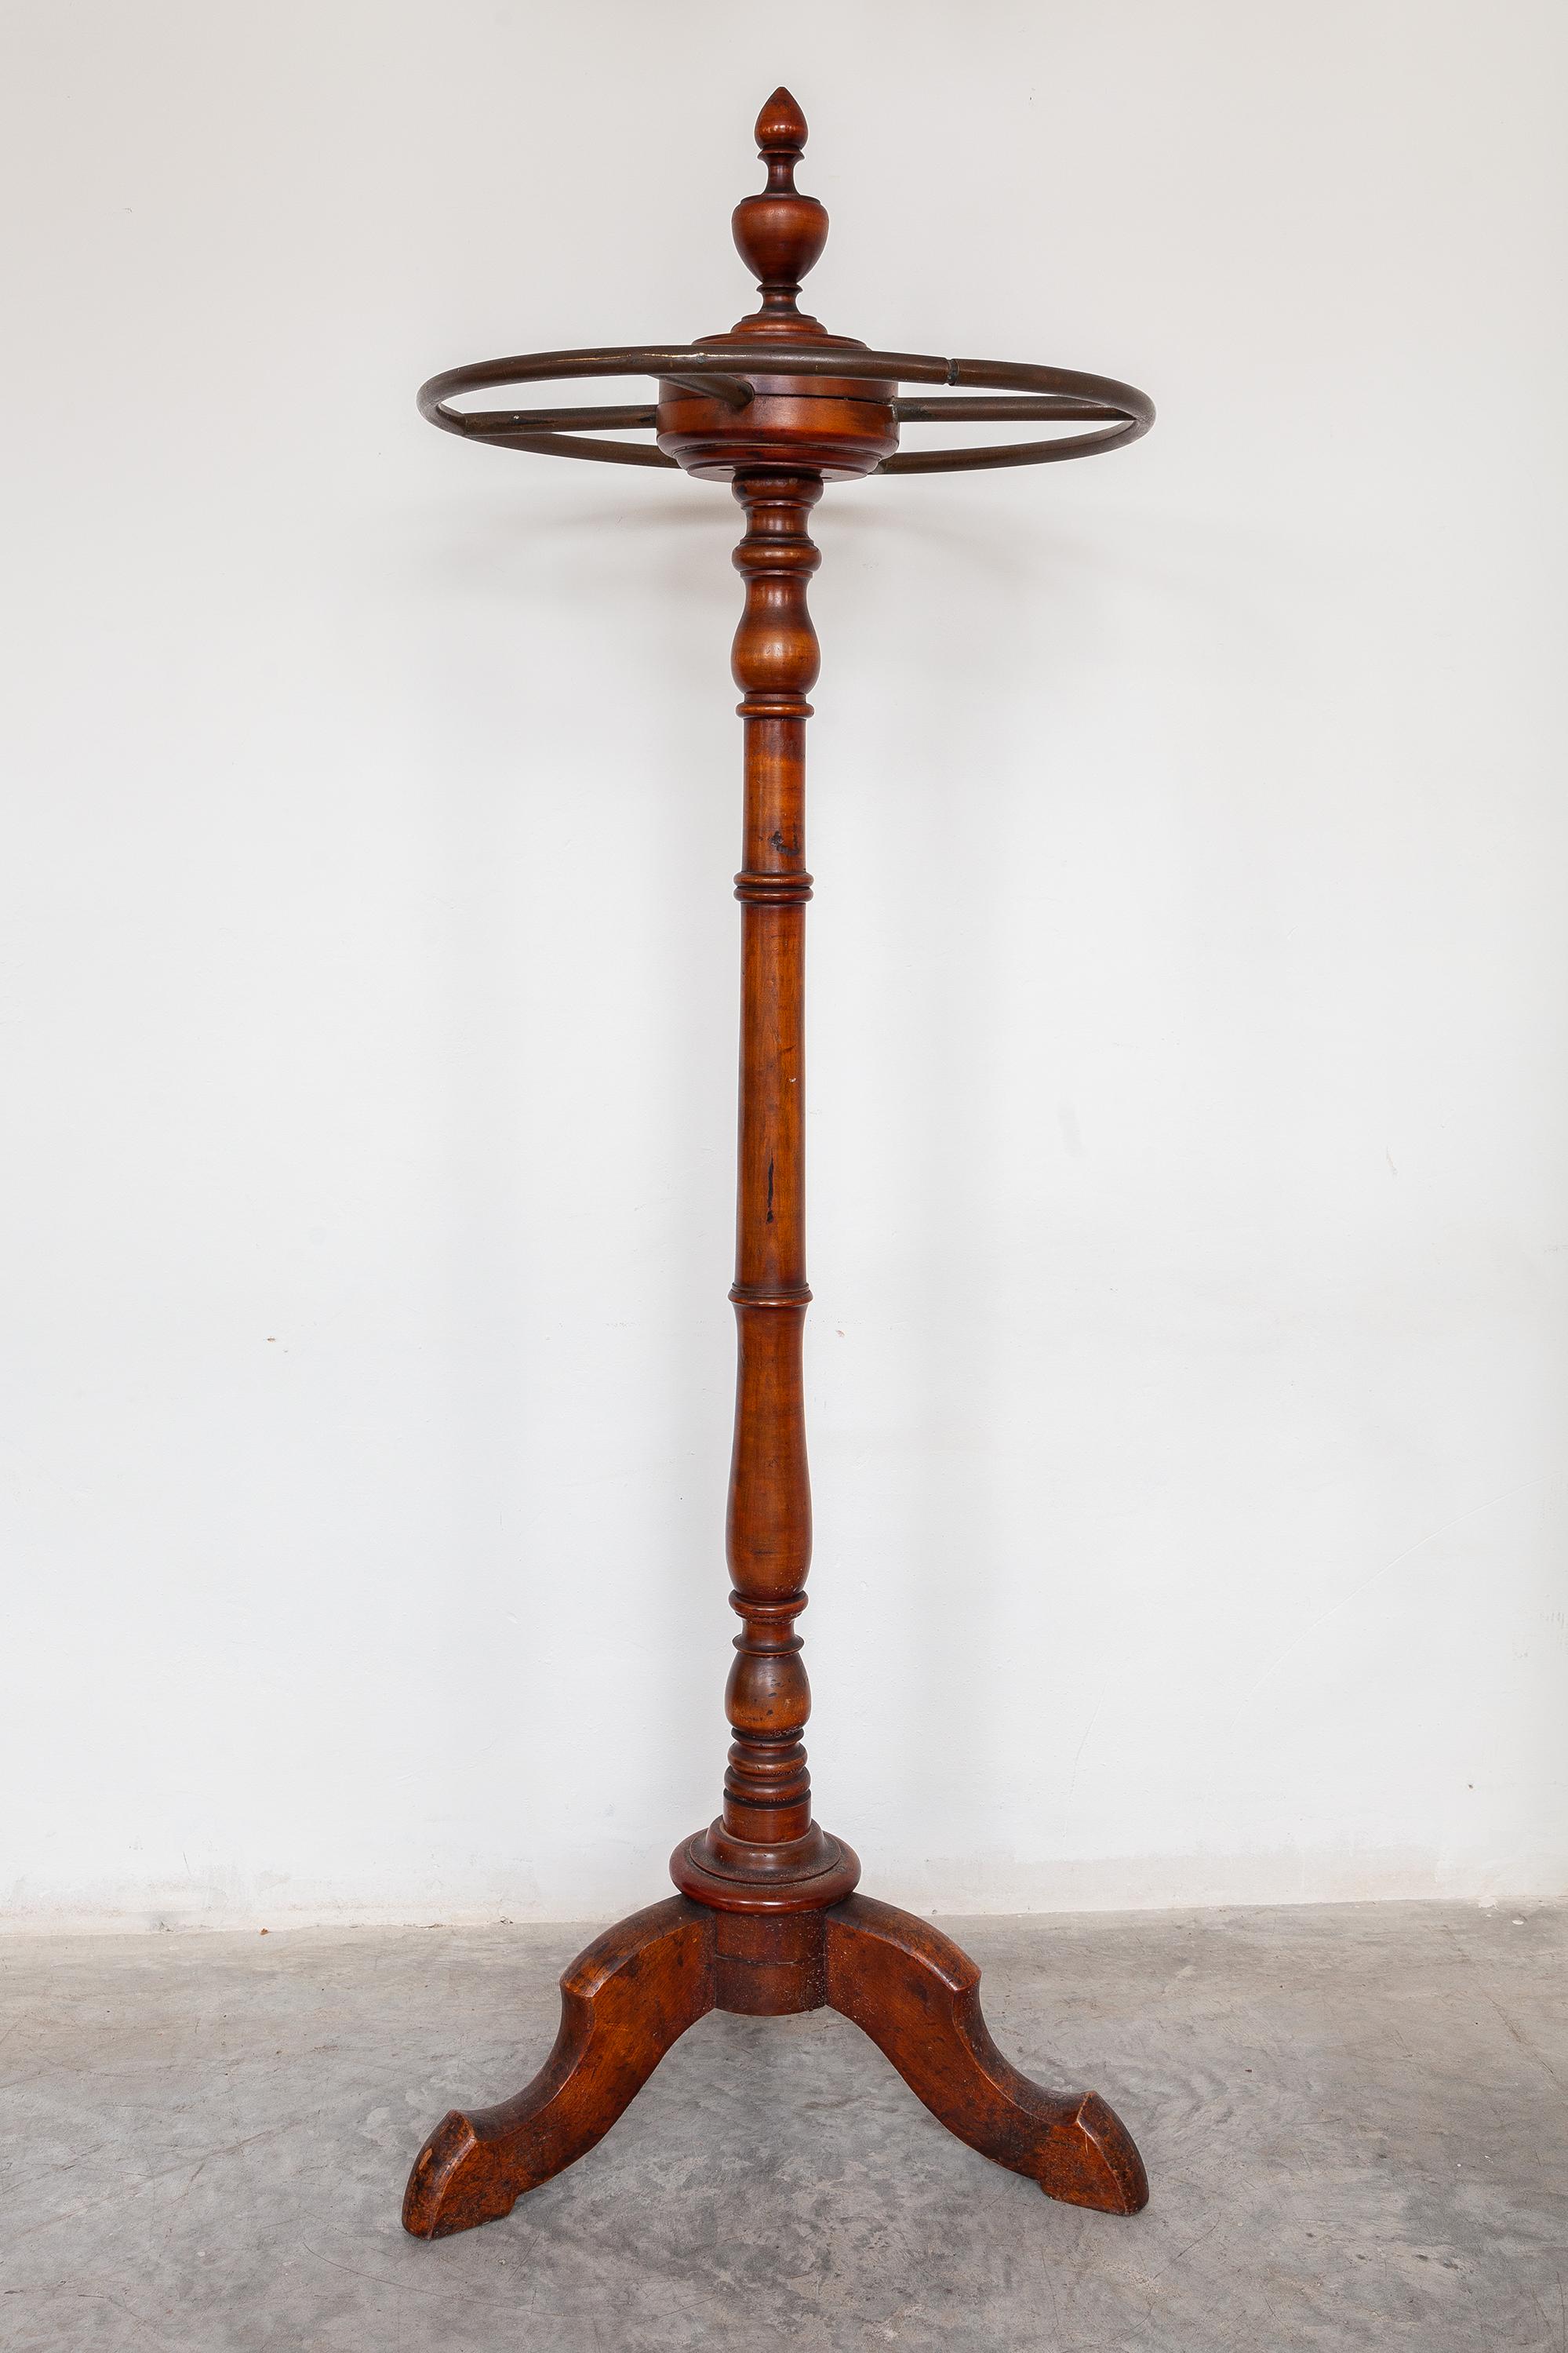 Antique coat rack. Elegant turned wood base with metal ring on which you can store coats on hangers or S hooks.
A practical freestanding and decorative storage solution to bring a touch of class to your home.